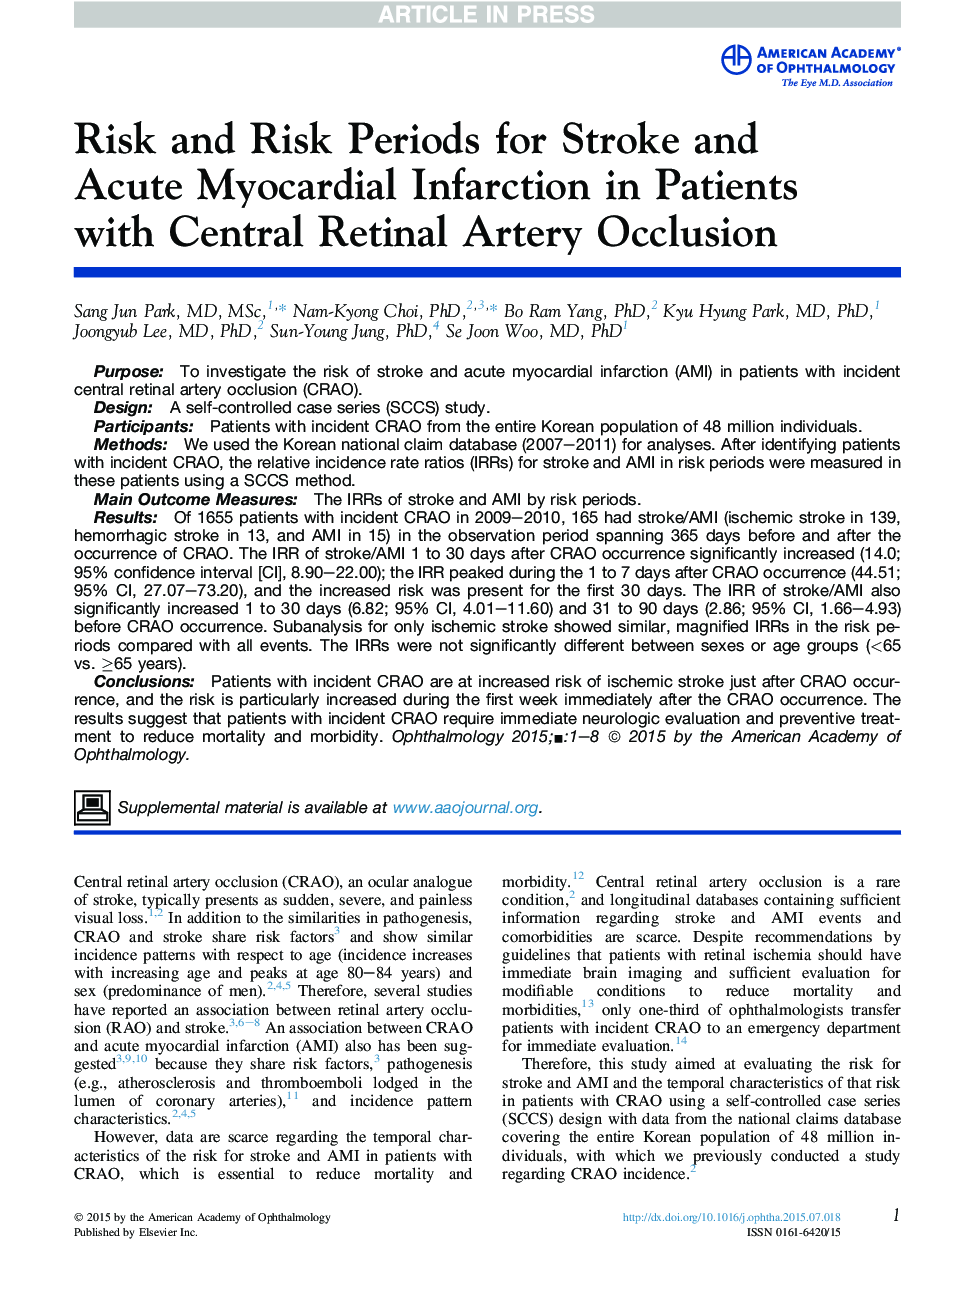 Risk and Risk Periods for Stroke and AcuteÂ Myocardial Infarction in Patients withÂ Central Retinal Artery Occlusion